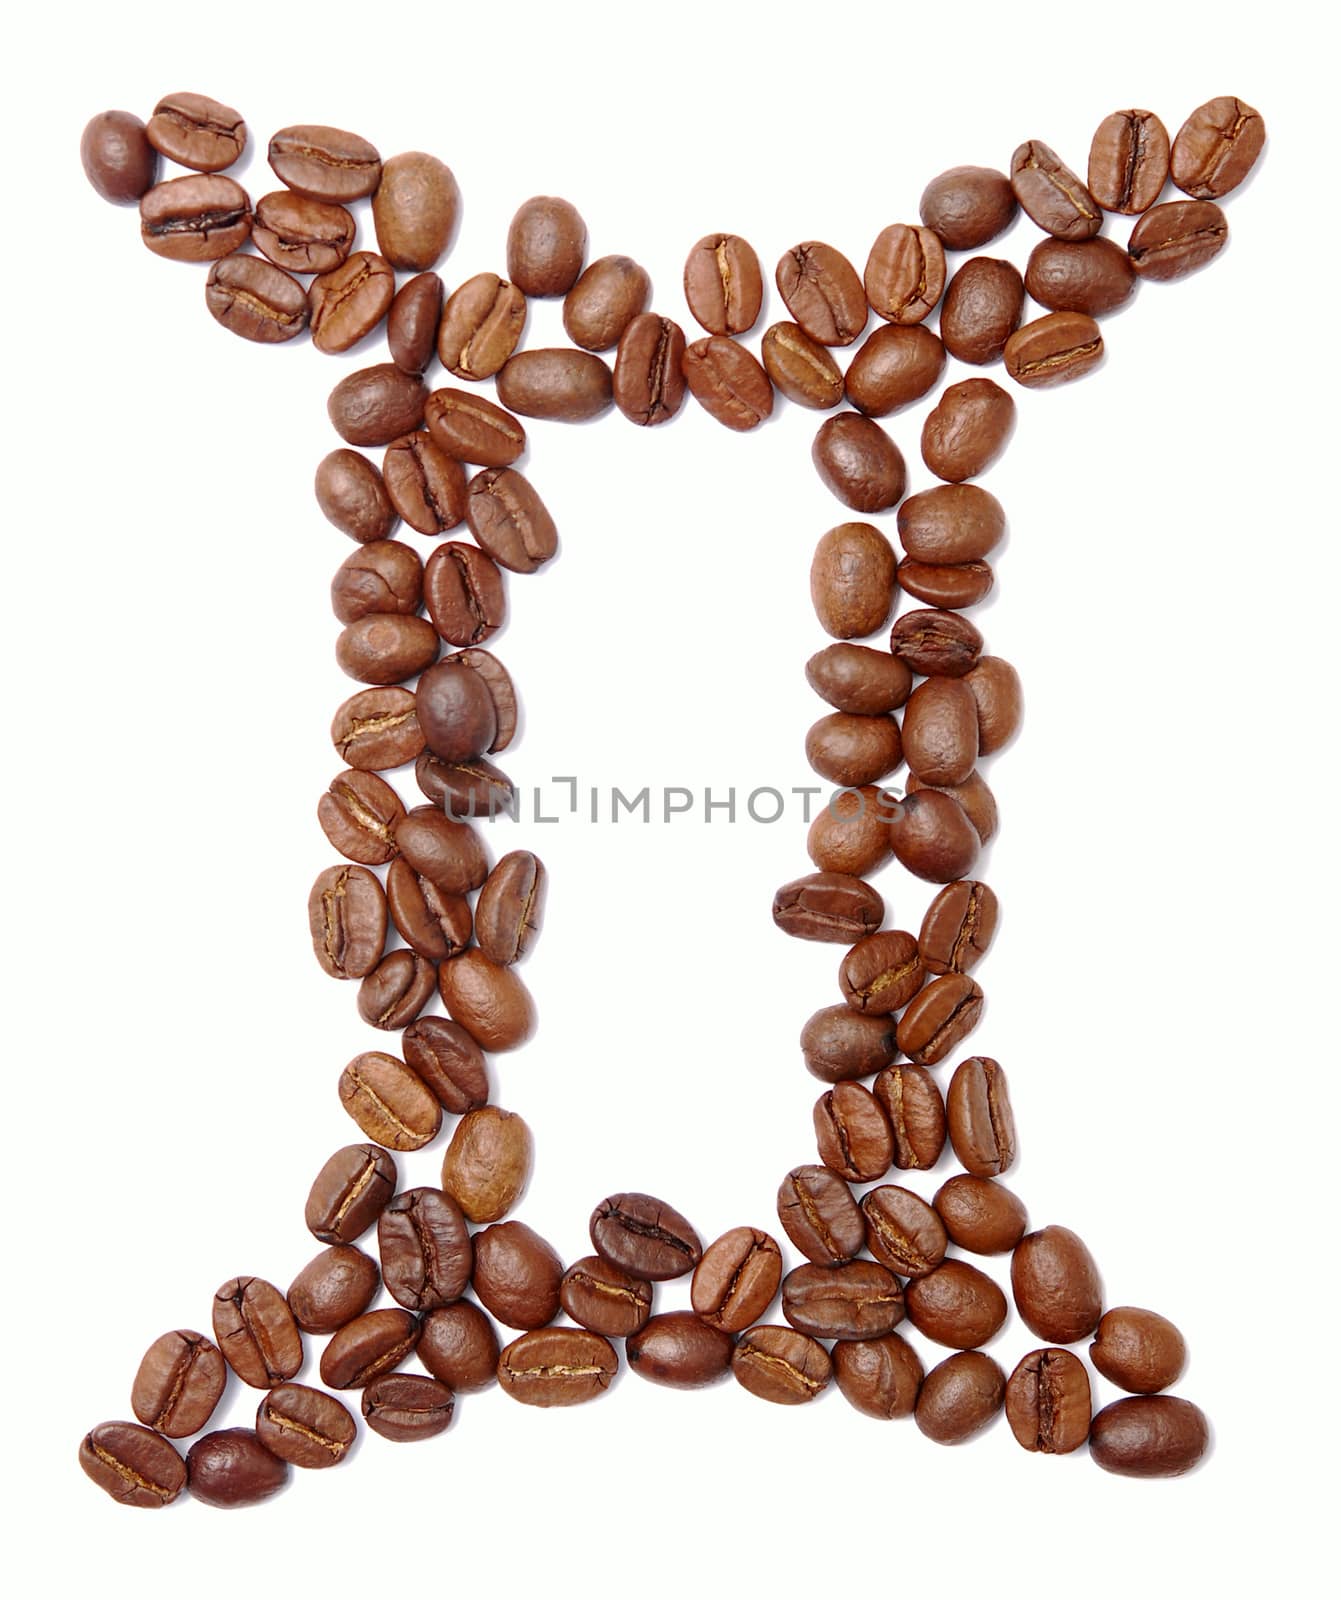 gemini (zodiac sign) of coffee beans isolated on white